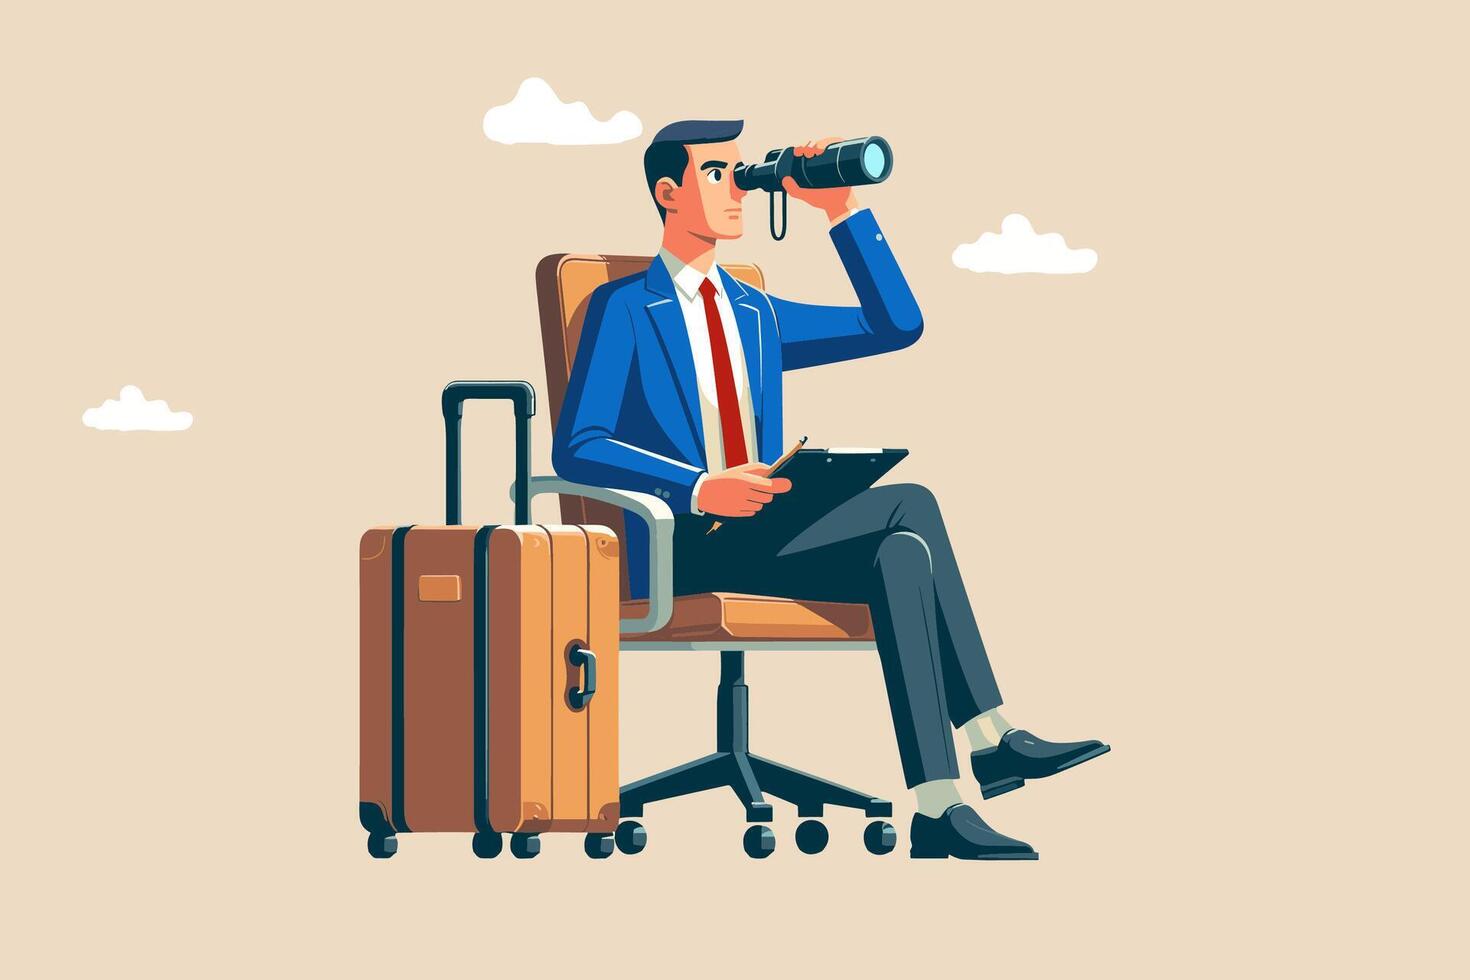 Searching for New Business Opportunities. Illustration of a businessman sitting on an office chair with wheels, holding a suitcase in his left hand and binoculars in his right vector